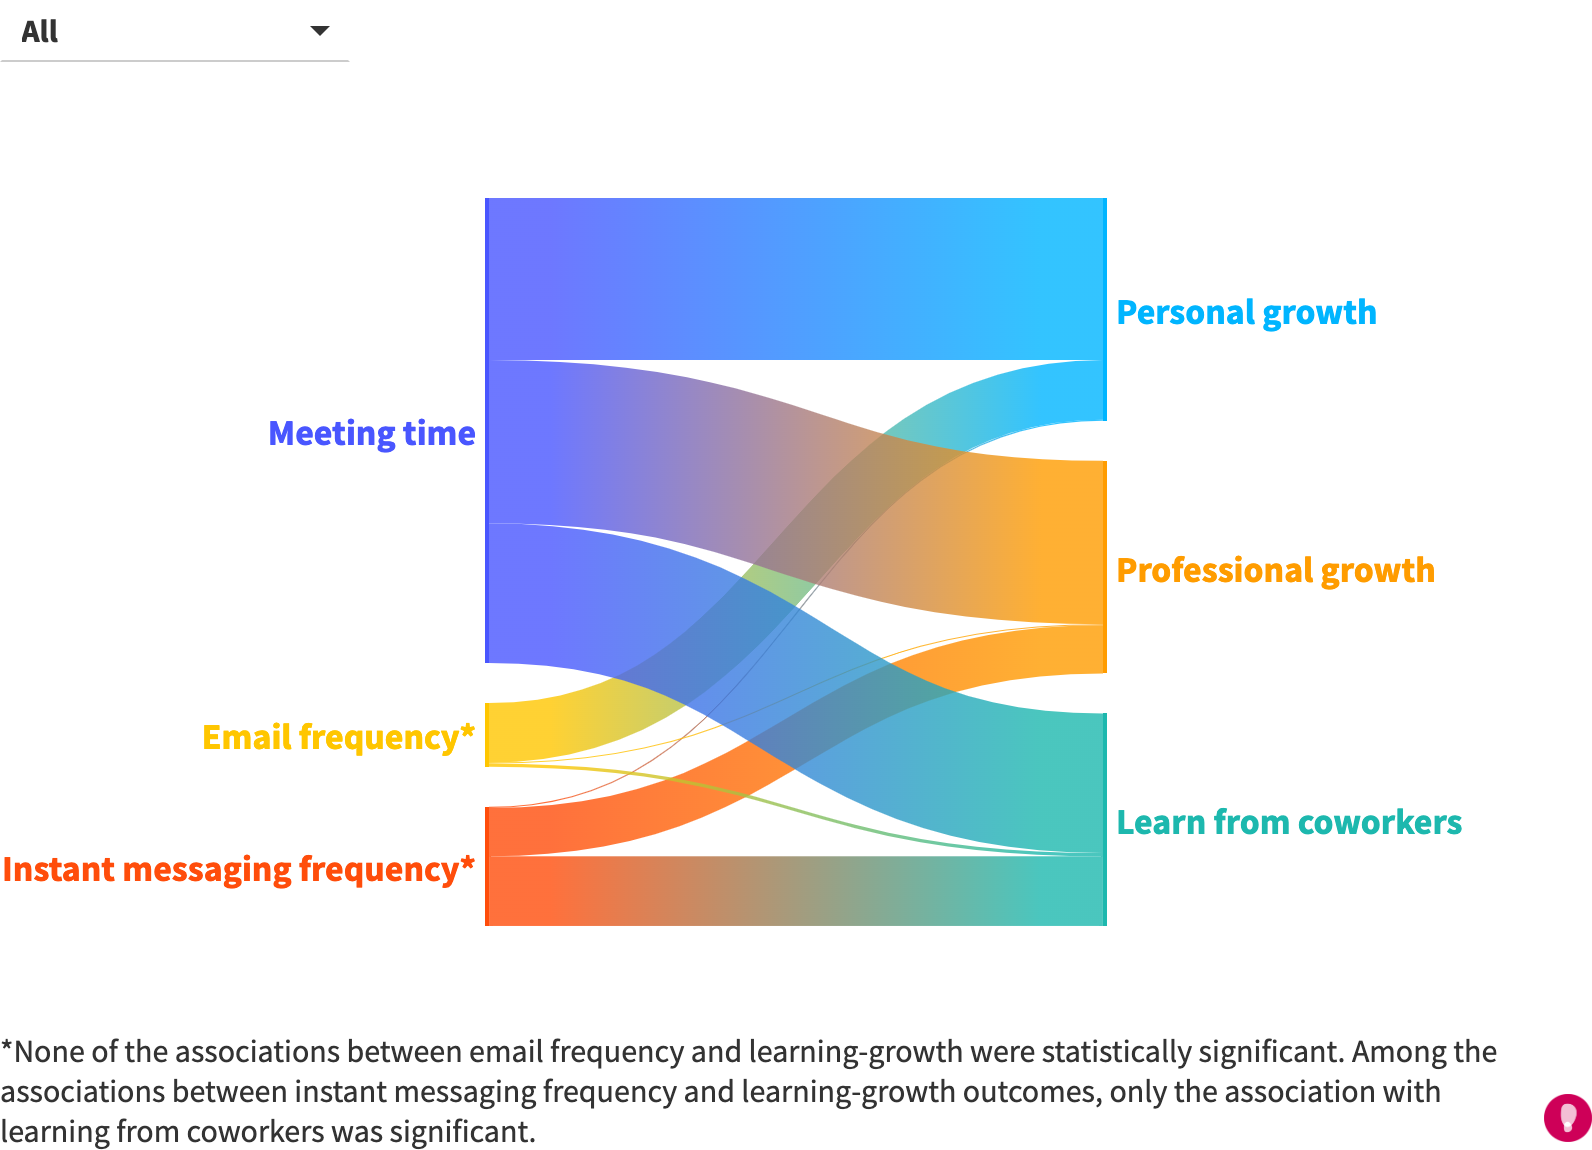 None of the associations between email frequency and learning-growth were significant